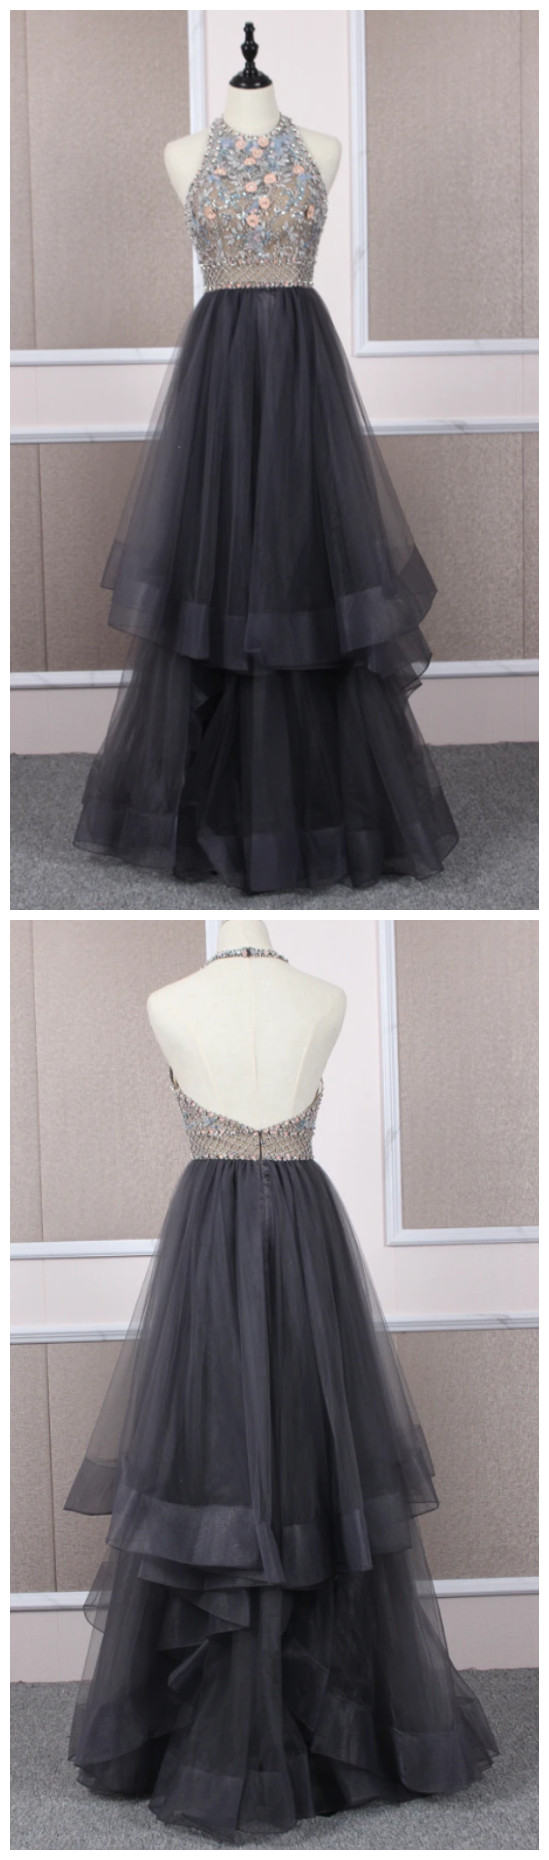 Unique Tulle Beads Long Prom Dress Tulle Long Evening Dress